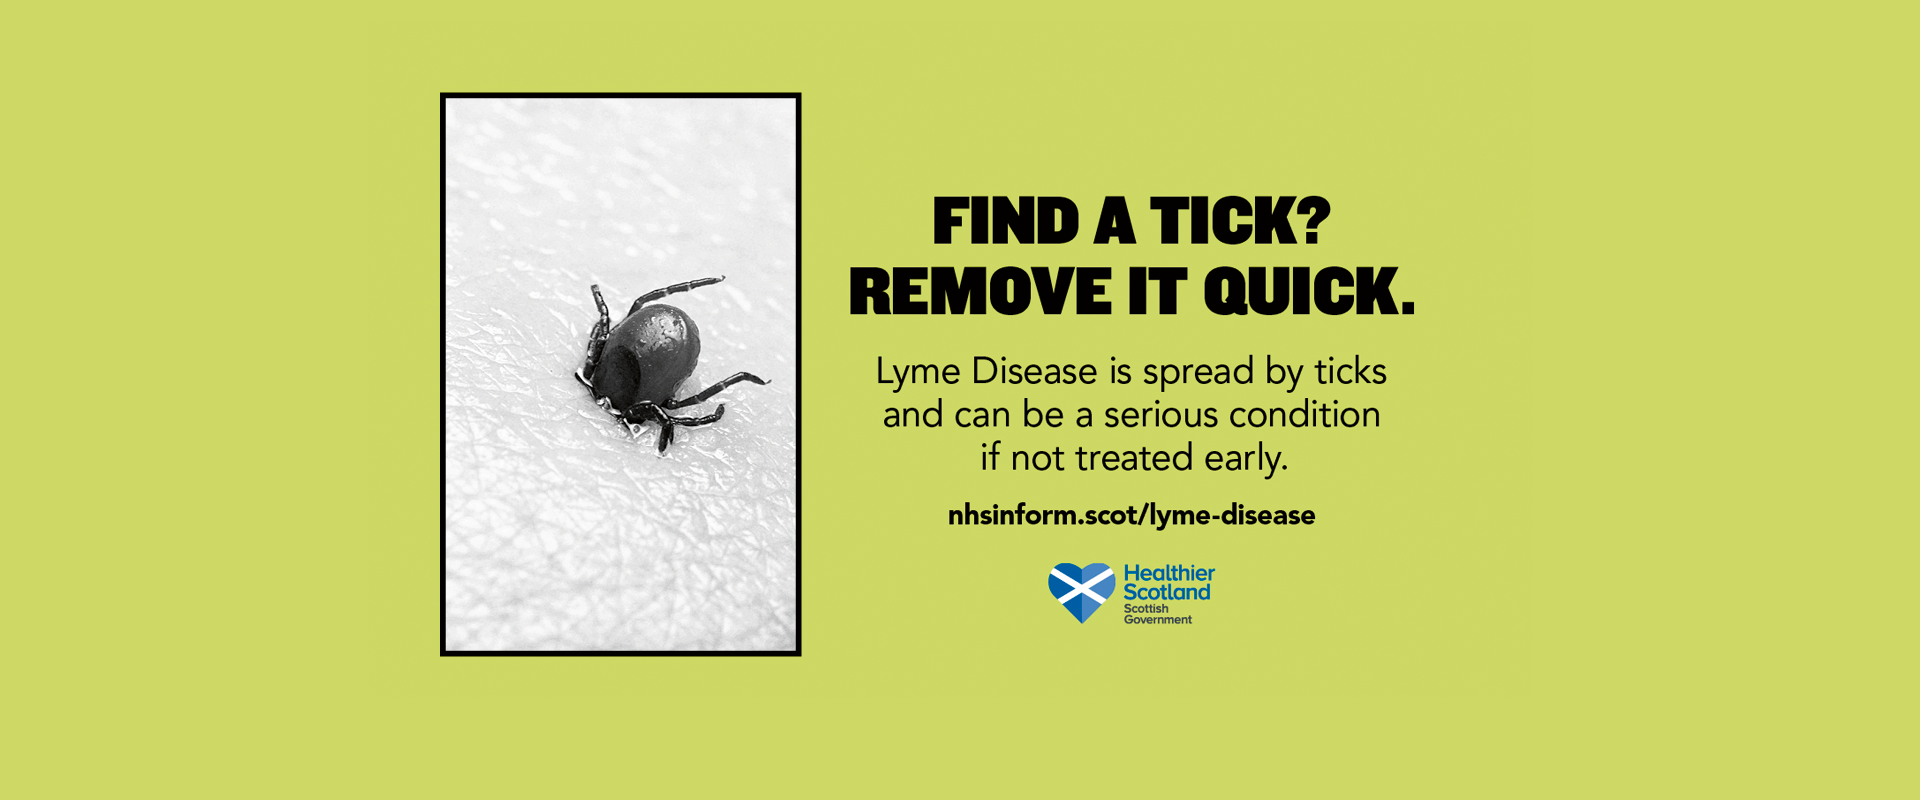 Lyme disease campaign image about ticks